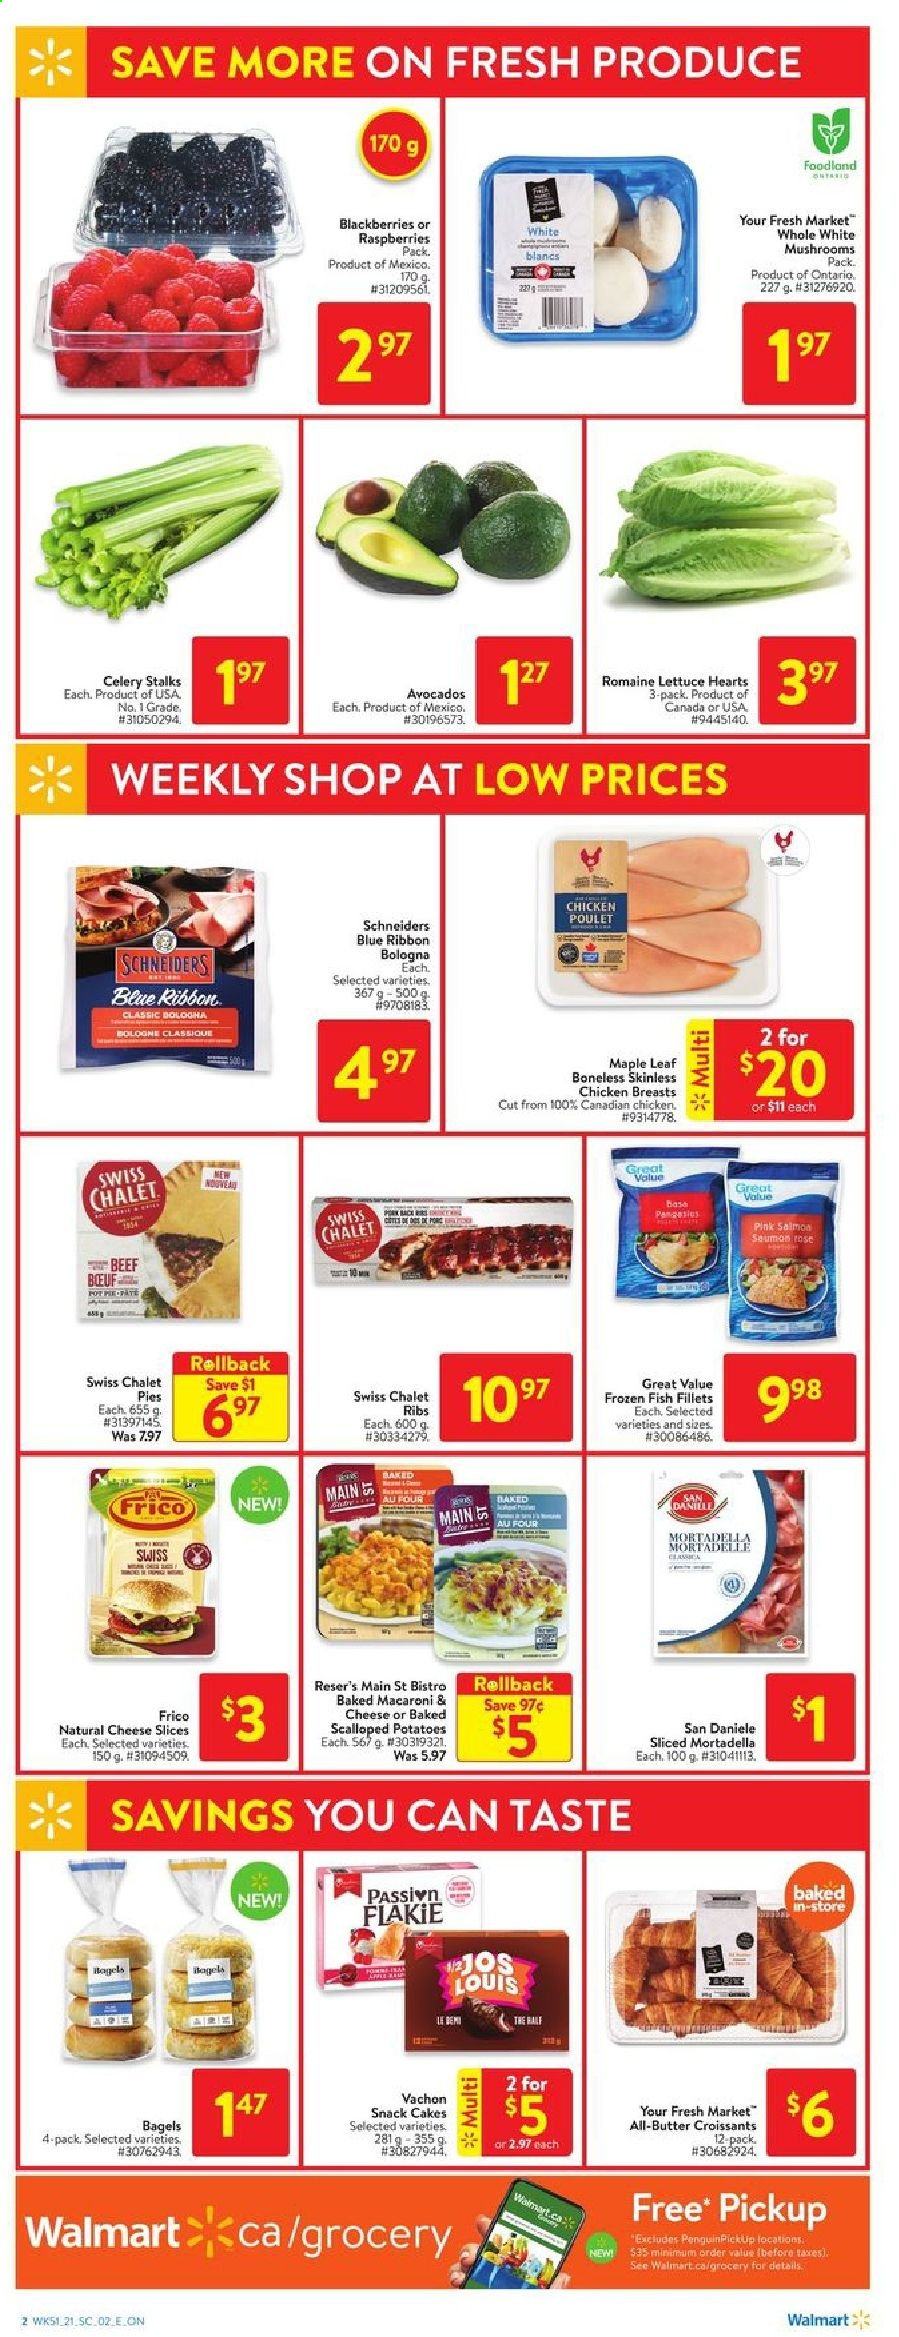 thumbnail - Walmart Flyer - January 14, 2021 - January 20, 2021 - Sales products - mushrooms, bagels, cake, croissant, Blue Ribbon, celery, potatoes, lettuce, sleeved celery, avocado, blackberries, fish fillets, salmon, fish, macaroni & cheese, mortadella, bologna sausage, sliced cheese, snack, rosé wine, chicken breasts, rose. Page 3.